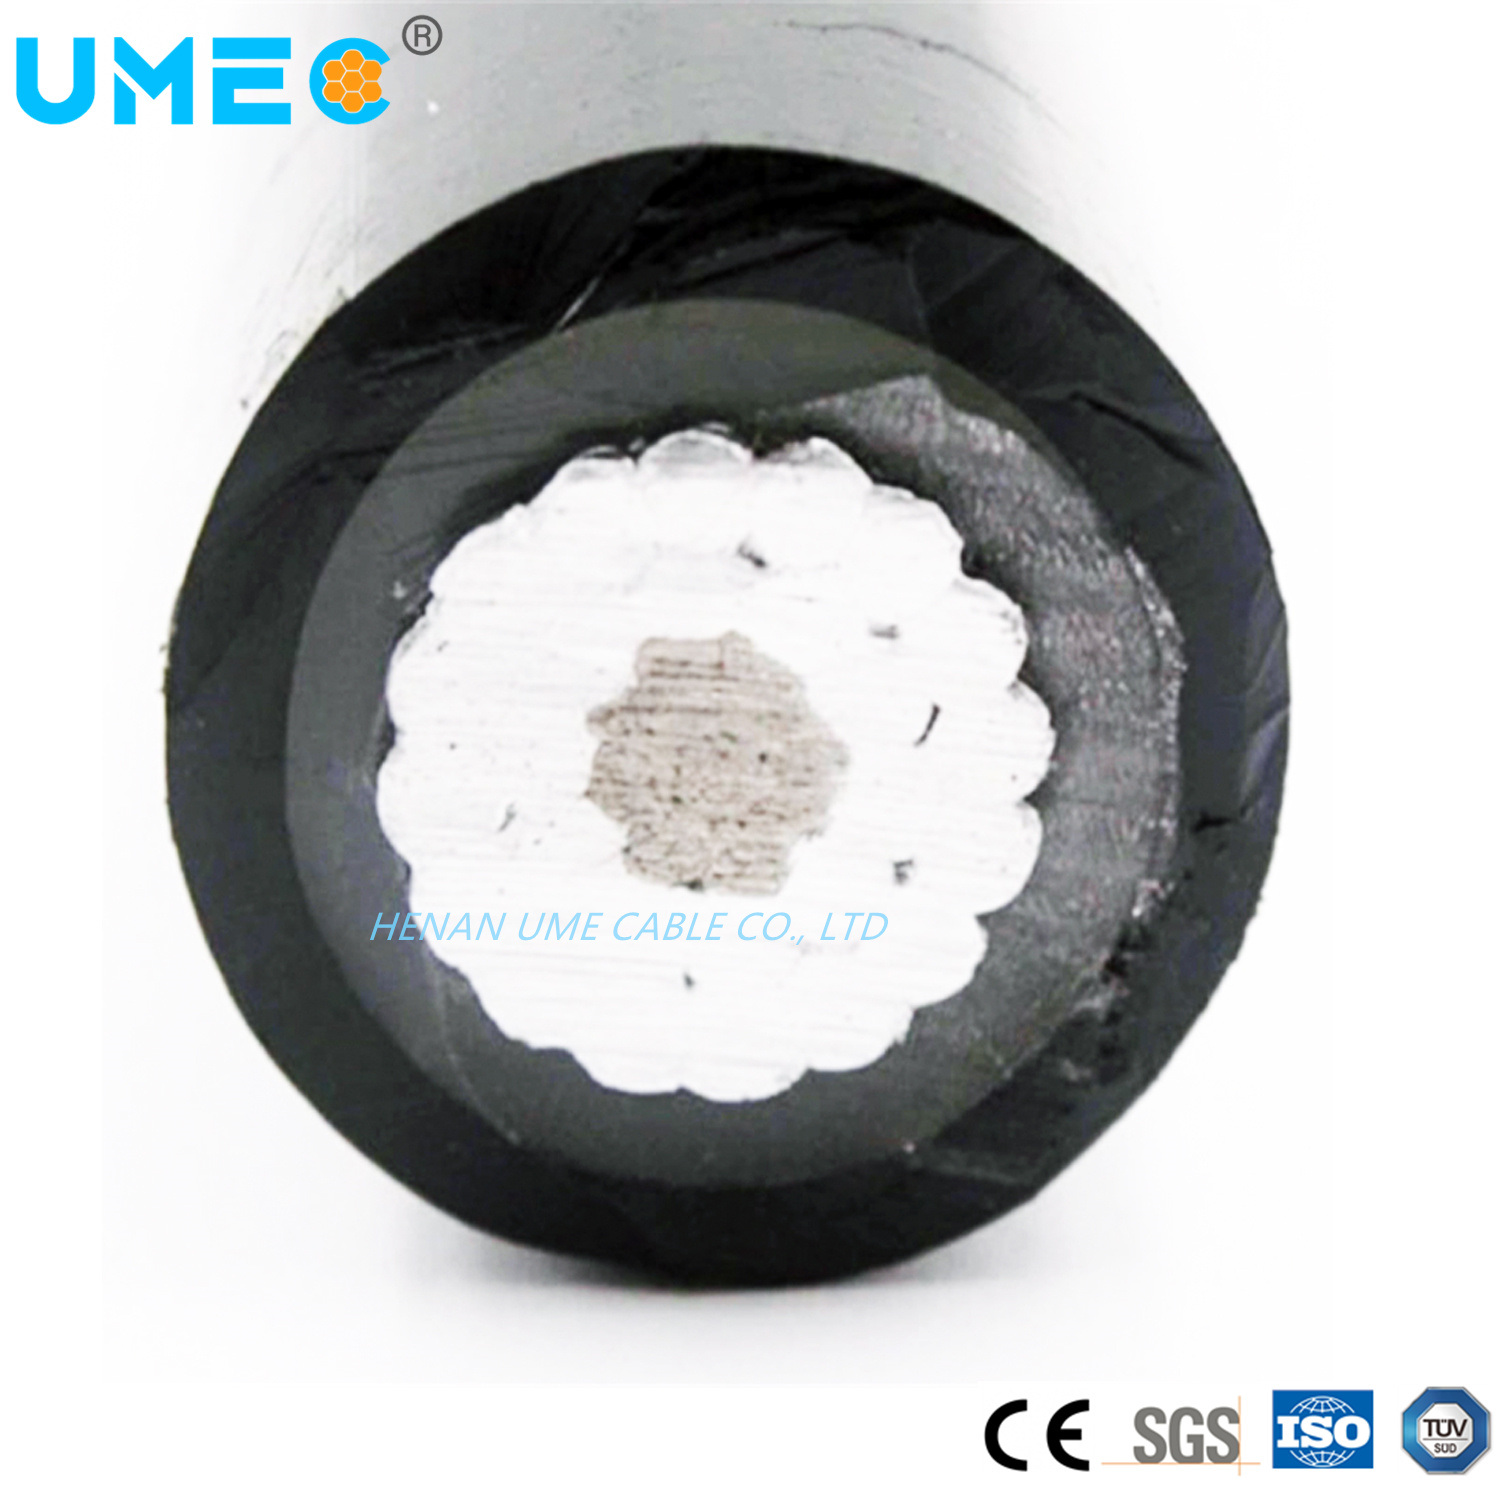 Power Tansmission Line Electrical Cable Wire HDPE XLPE Insulated Hornbeam Linden Oilnut Waterash Shellbark Planetree Code Covered Line Wire